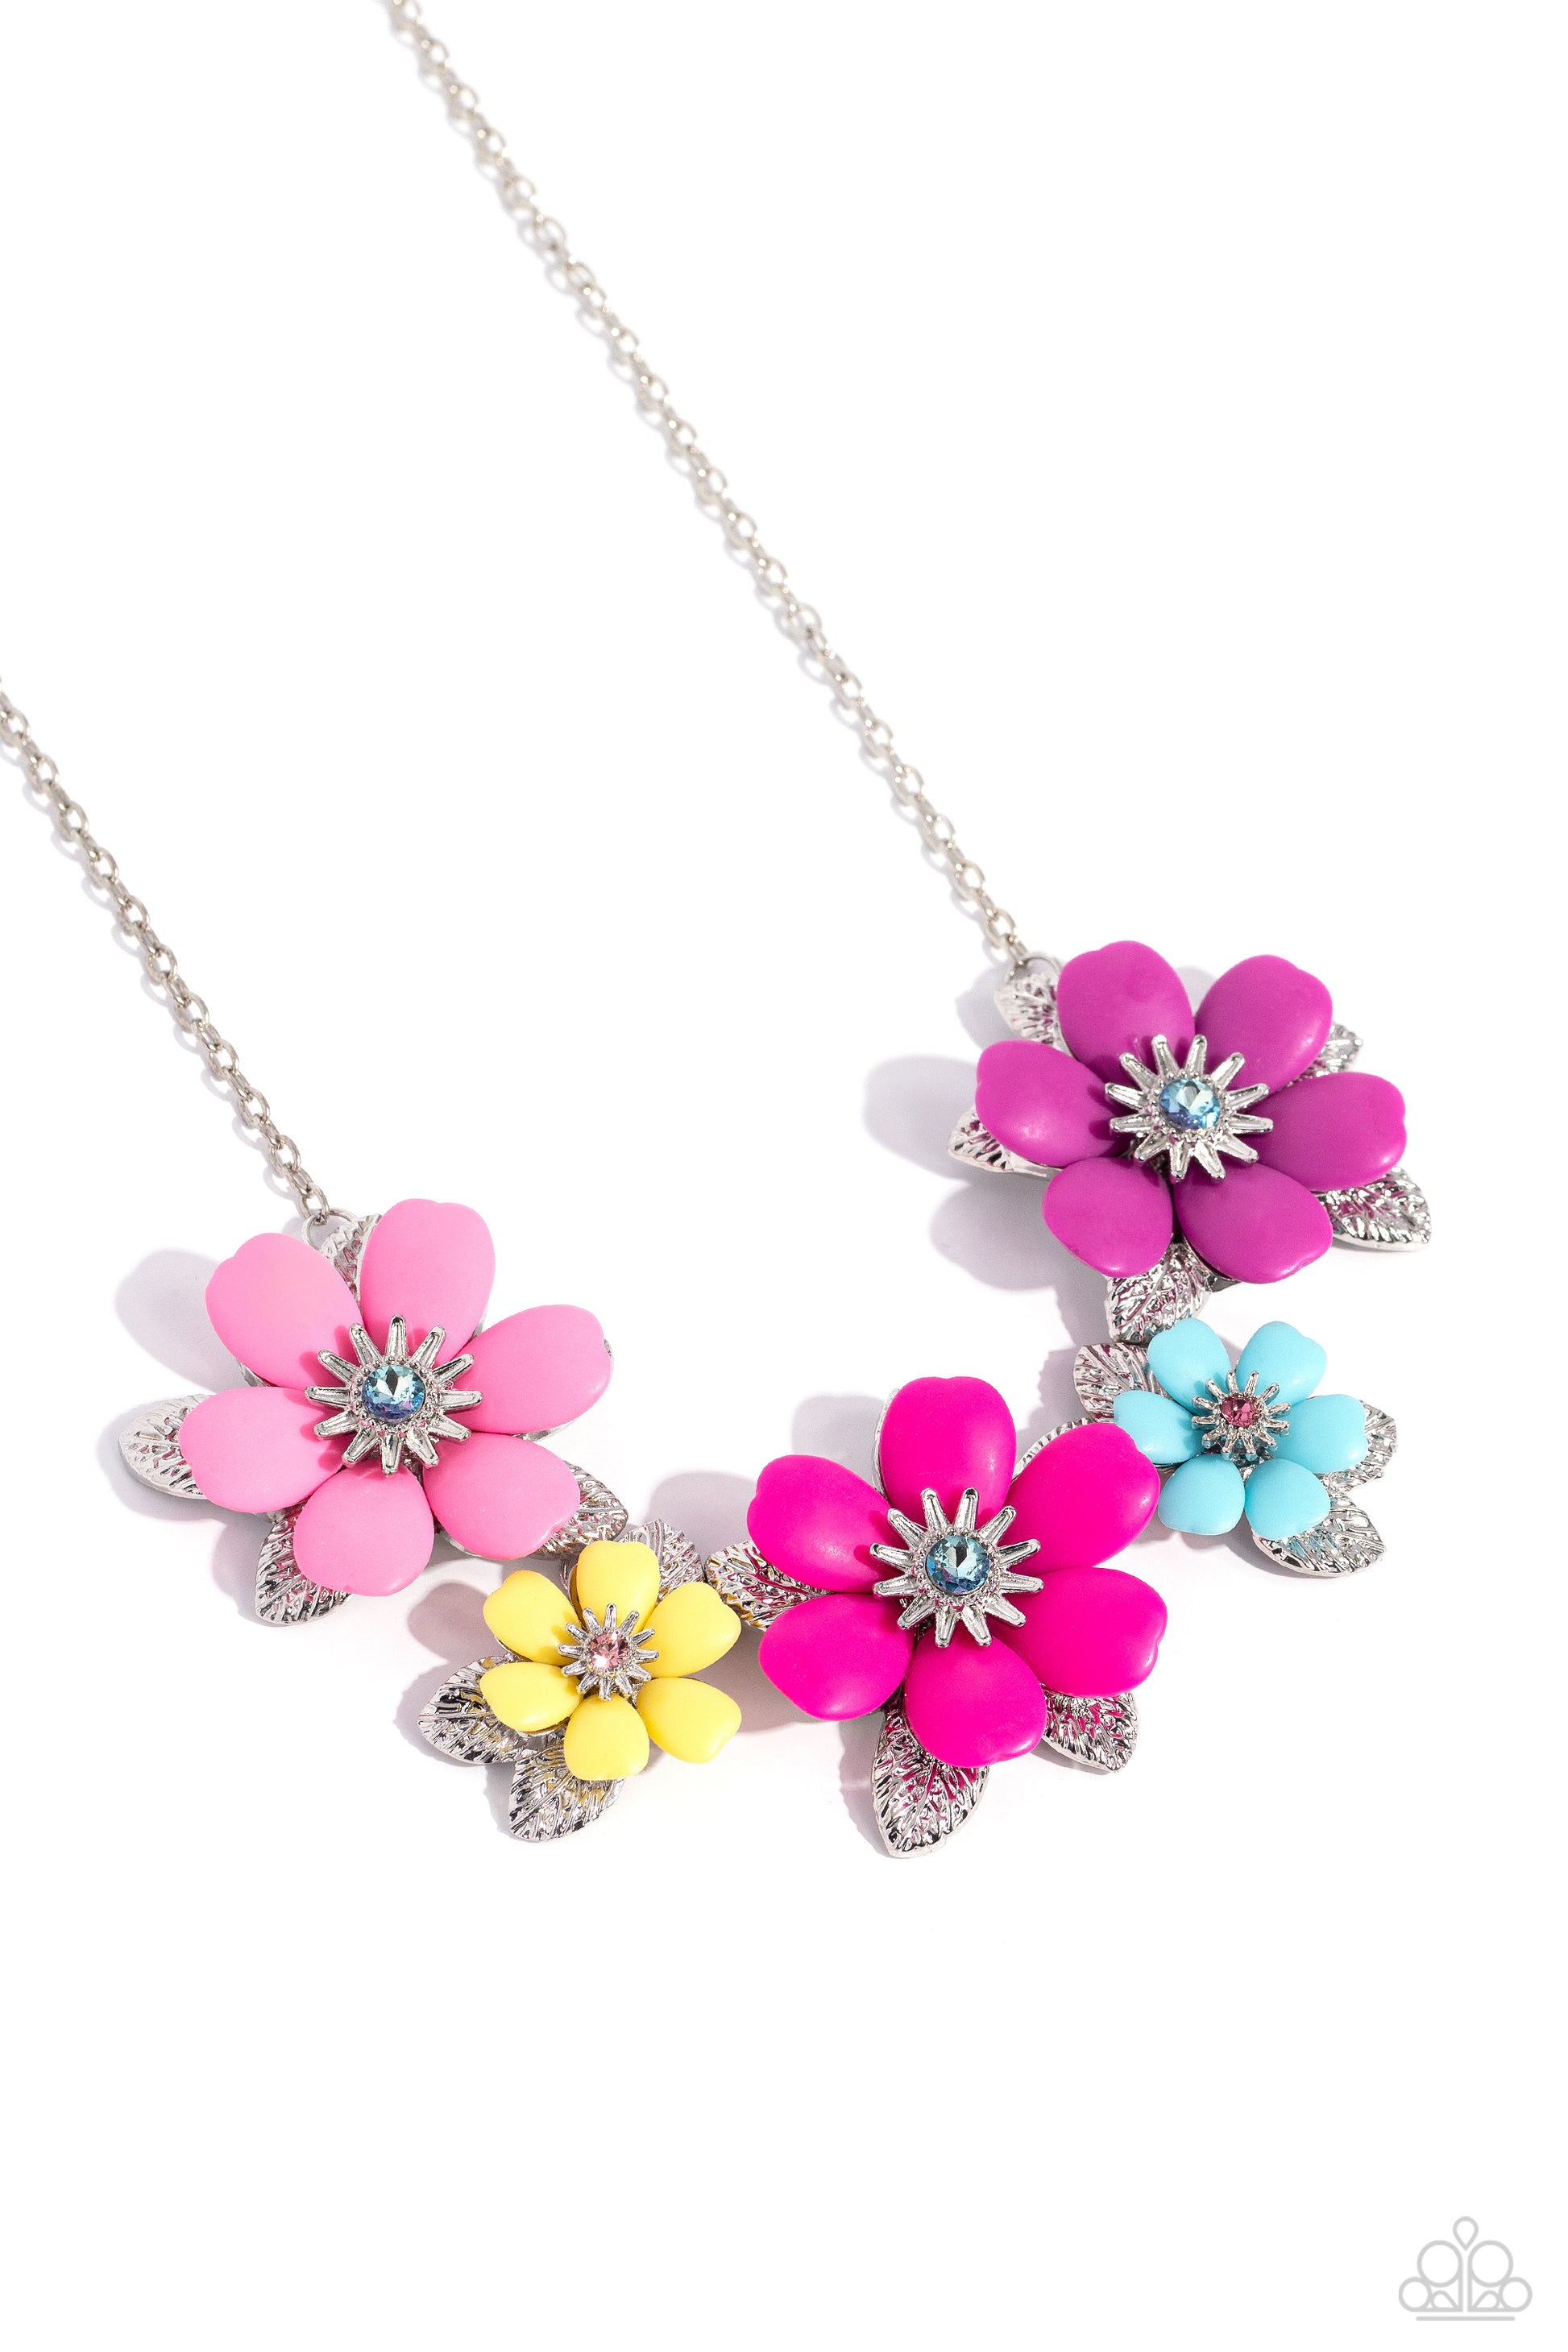 Well-Mannered Whimsy Multi Flower Necklace - Paparazzi Accessories  Dotted with dainty light amethyst, aquamarine, and rose rhinestone centers, dainty silver flowers bloom against a backdrop of glossy acrylic flowers in Aurora Pink, Rose Violet, hot pink, yellow, and Spun Sugar hues. Each flower, varying in size, blossoms across a textured collection of silver leaves below the collar, invoking a festive spirit. Features an adjustable clasp closure.